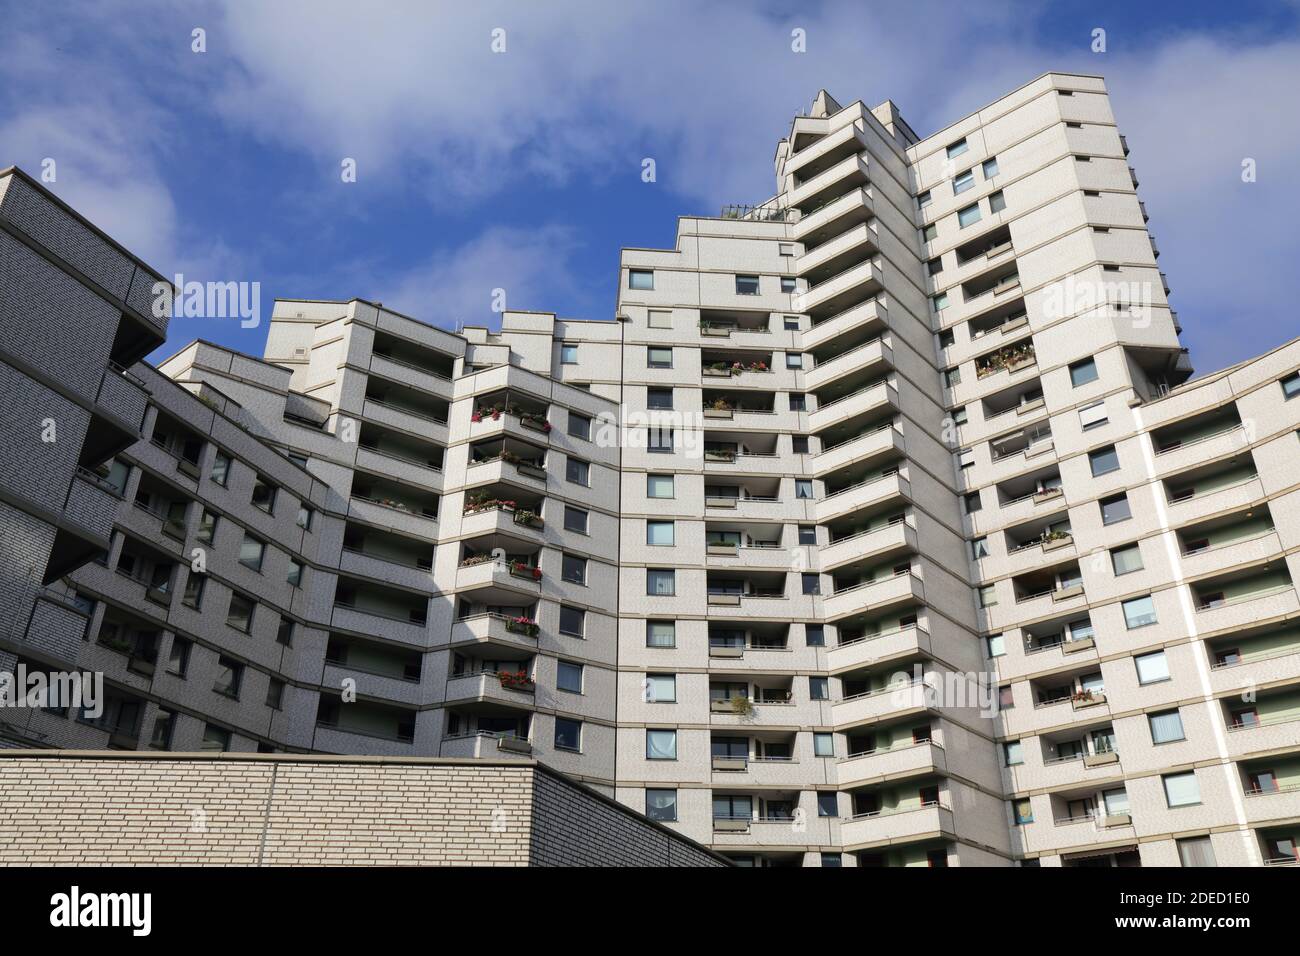 GELSENKIRCHEN, GERMANY - SEPTEMBER 17, 2020: Aparment building in Gelsenkirchen, Germany. Official name of the building is City-Wohnanlage, but locals Stock Photo